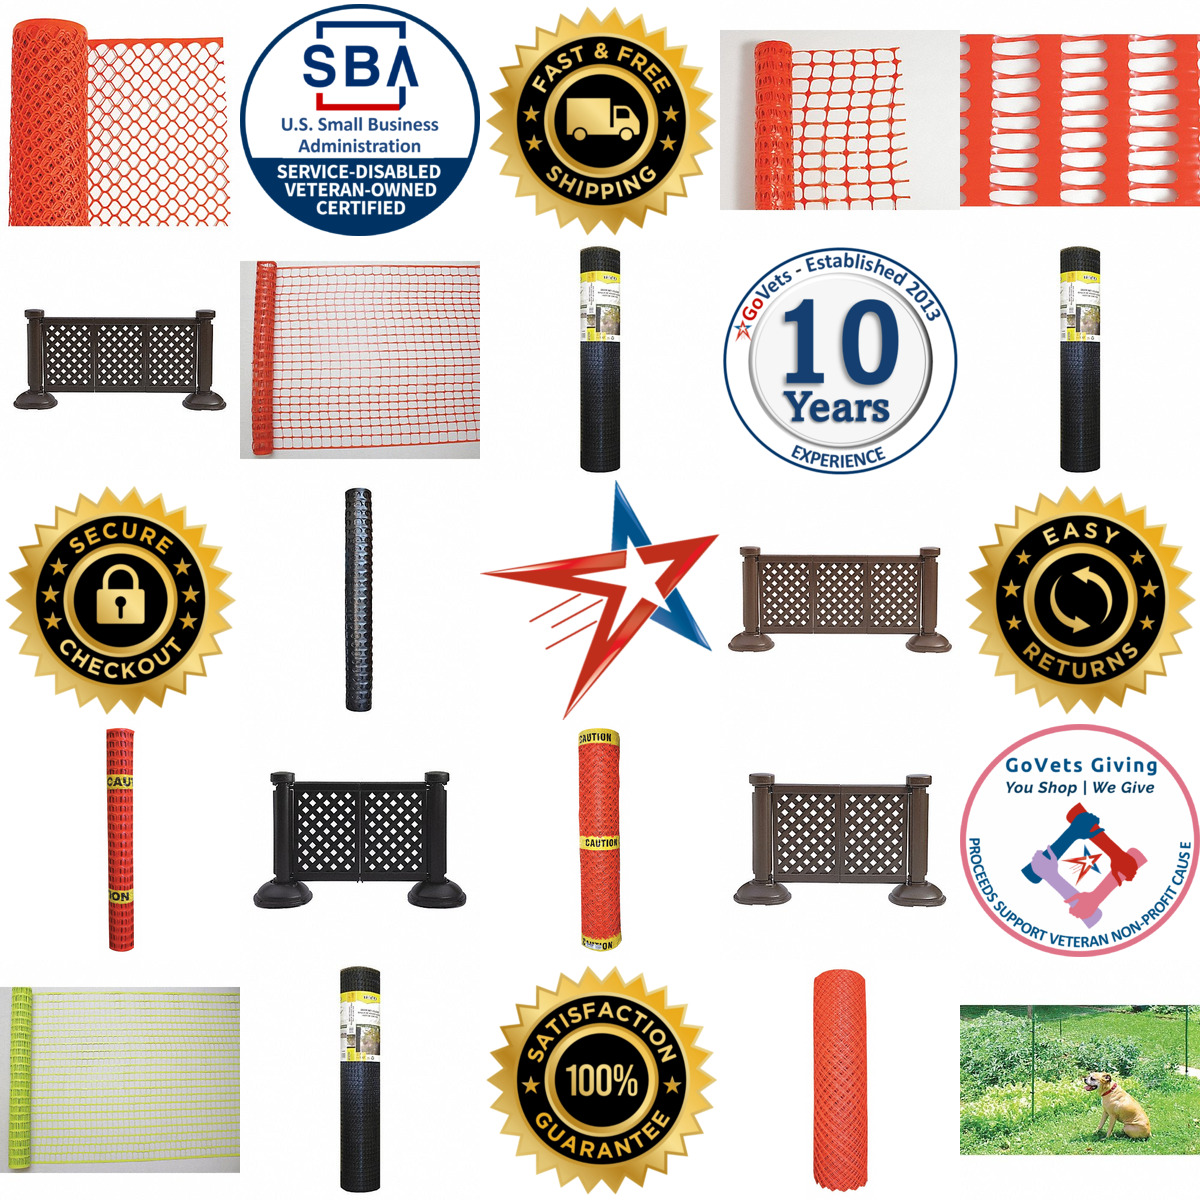 A selection of Barrier and Safety Fence products on GoVets